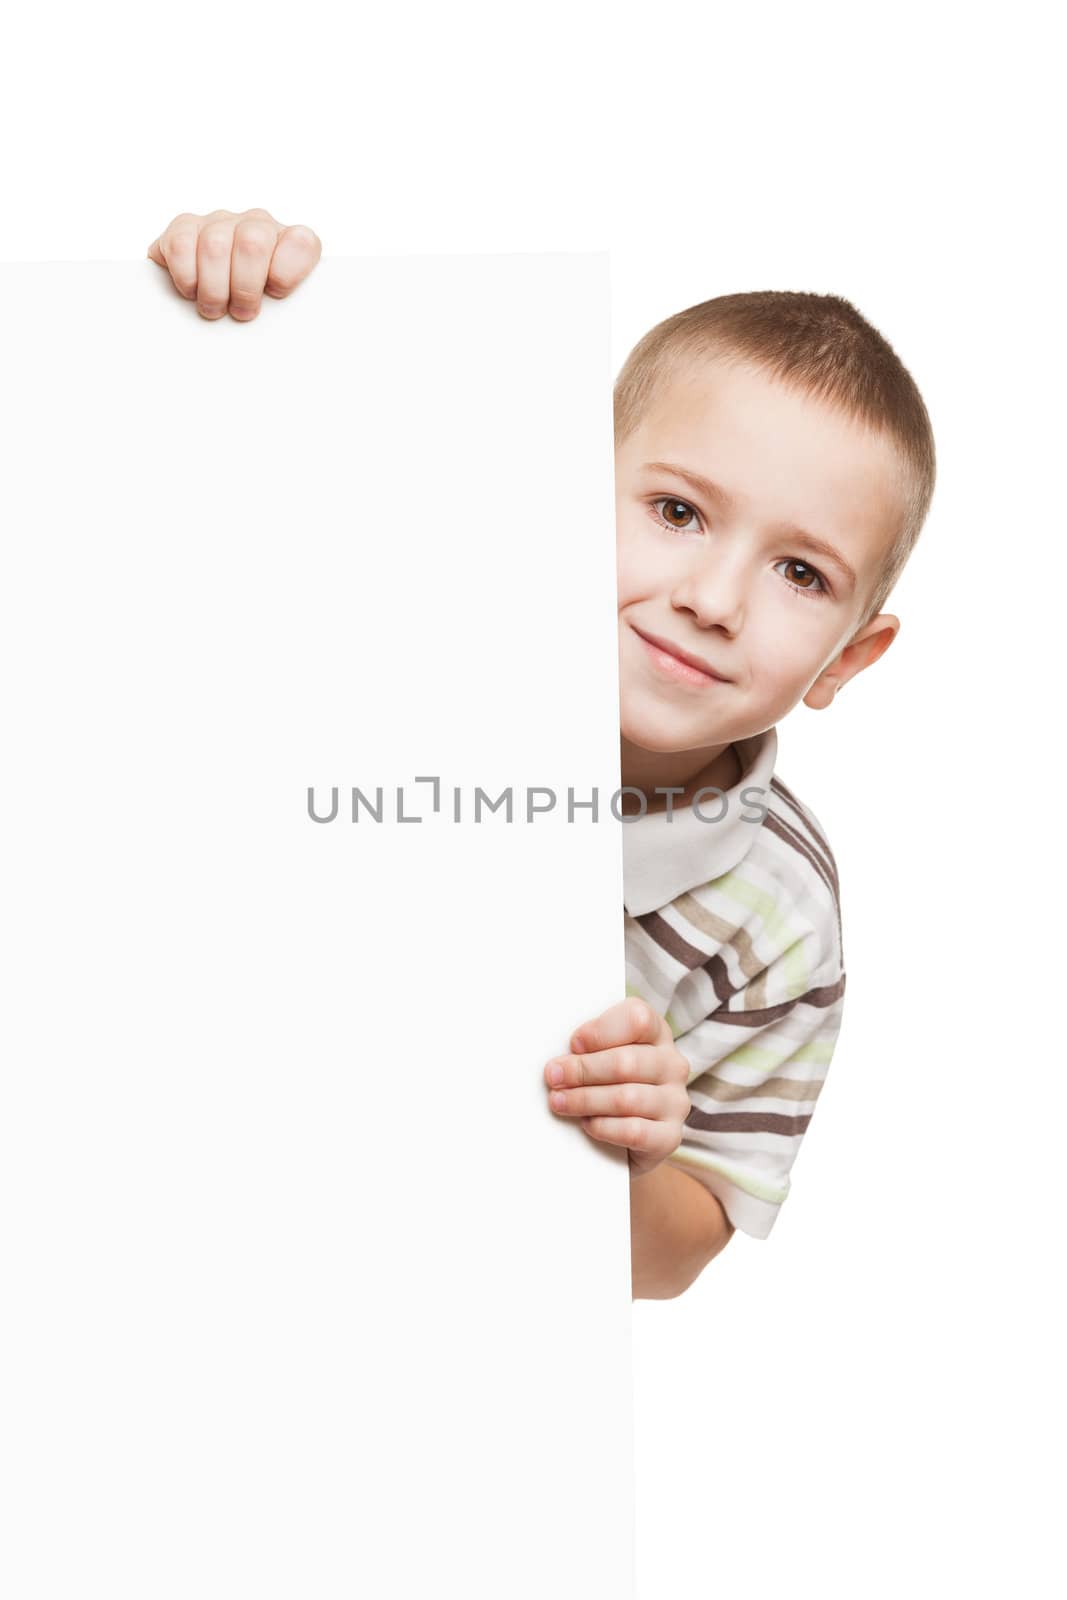 Child holding blank placard by ia_64